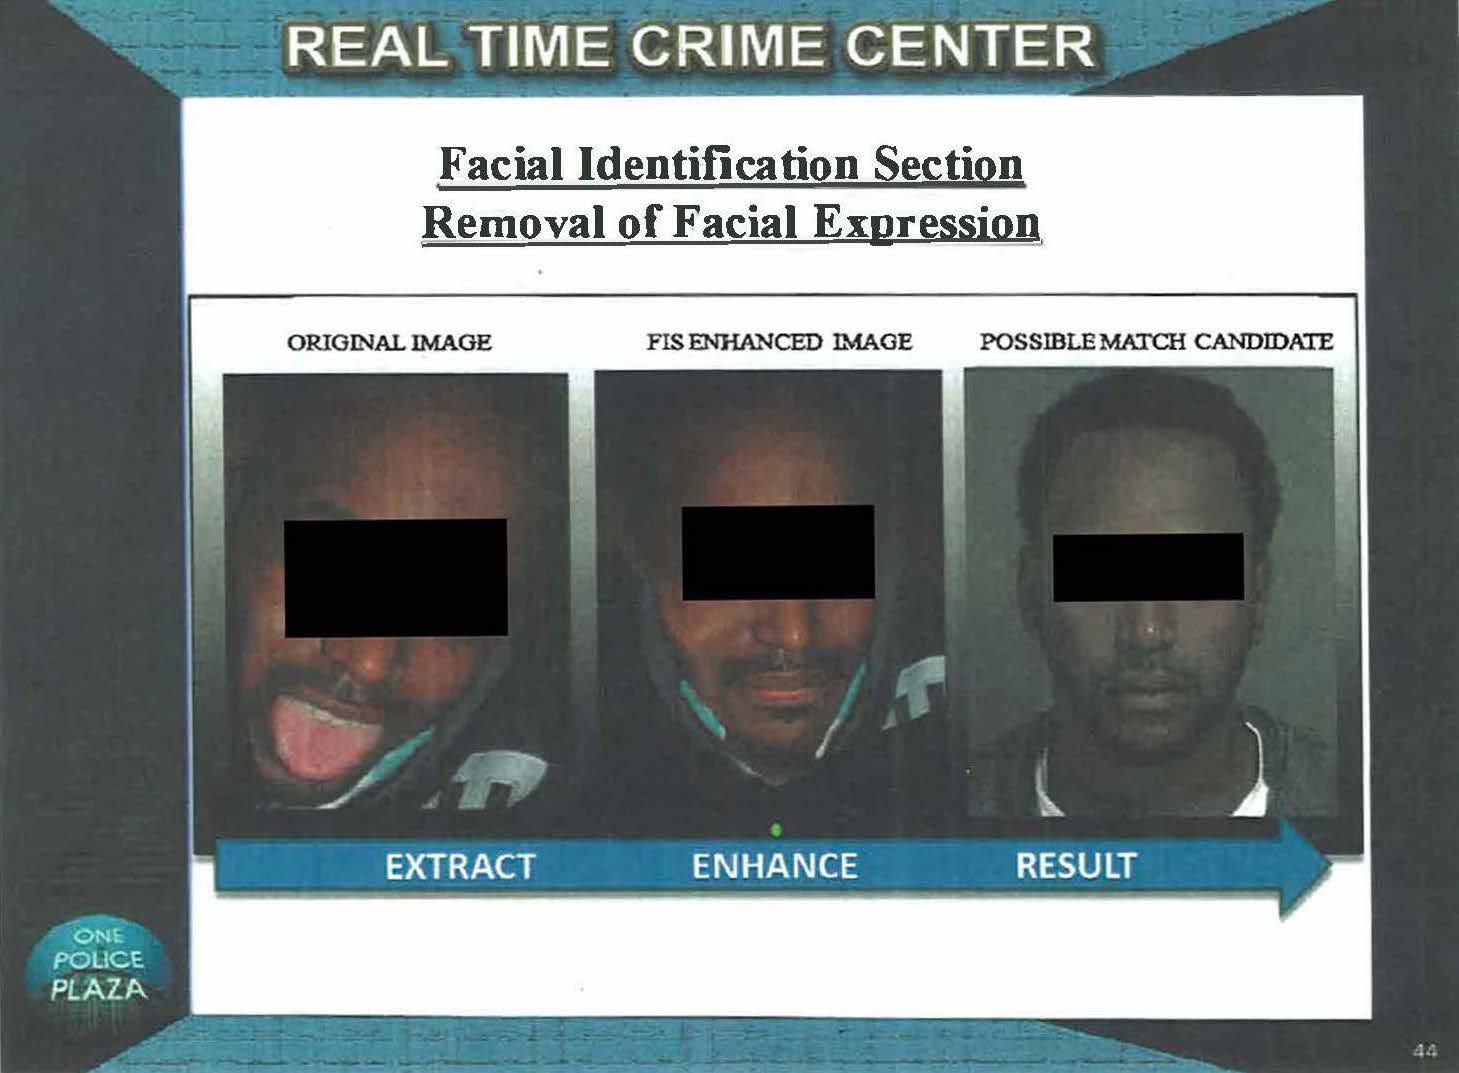 Police are allowed to manipulate probe photos before submitting them to facial recognition systems.